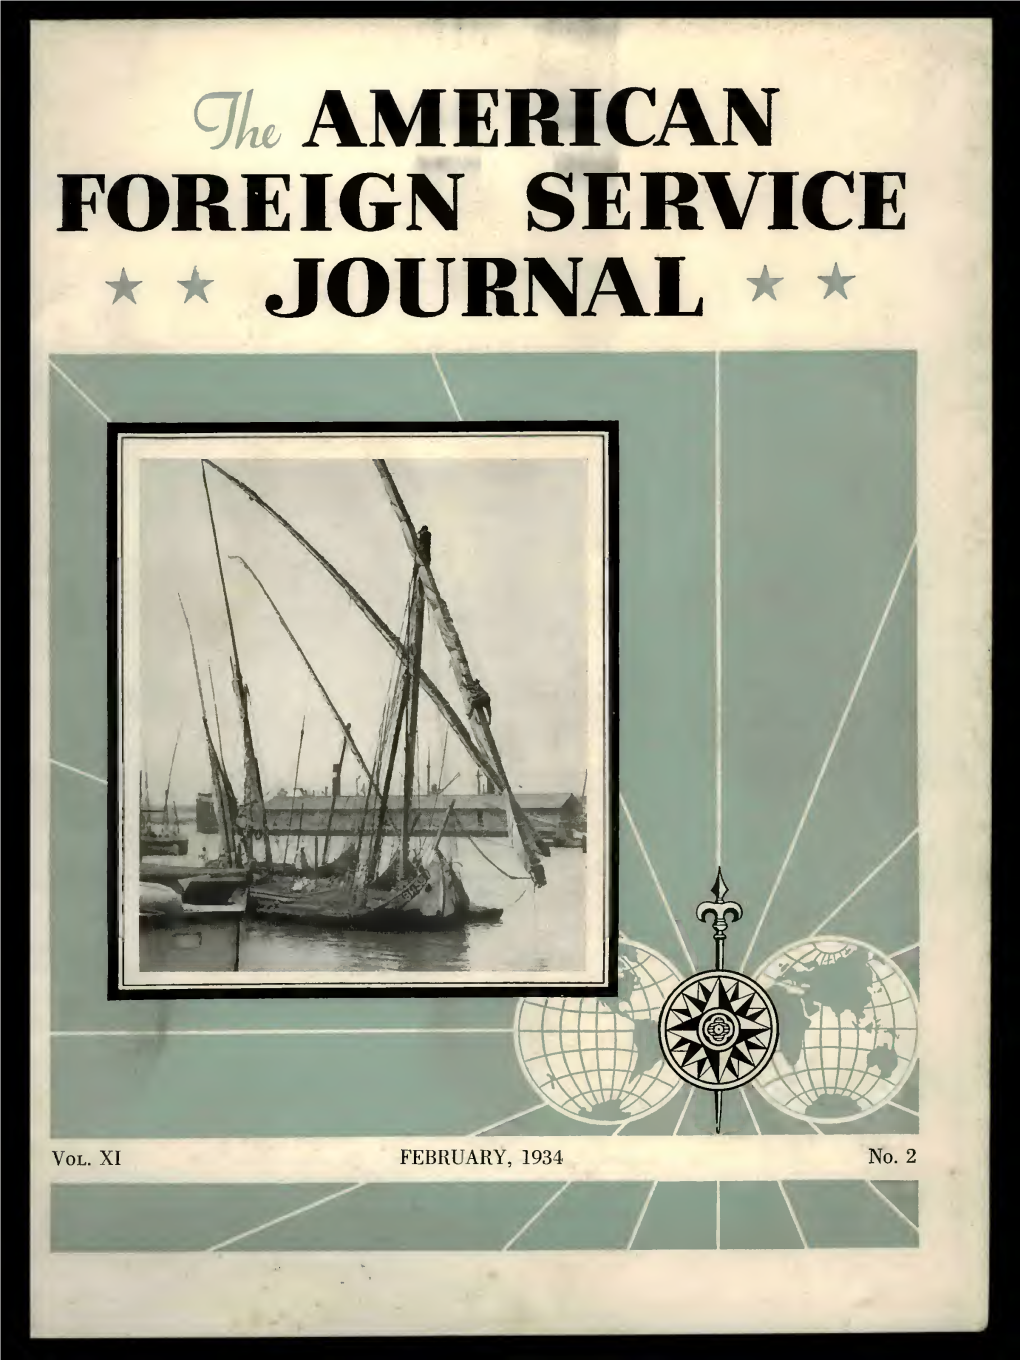 The Foreign Service Journal, February 1934